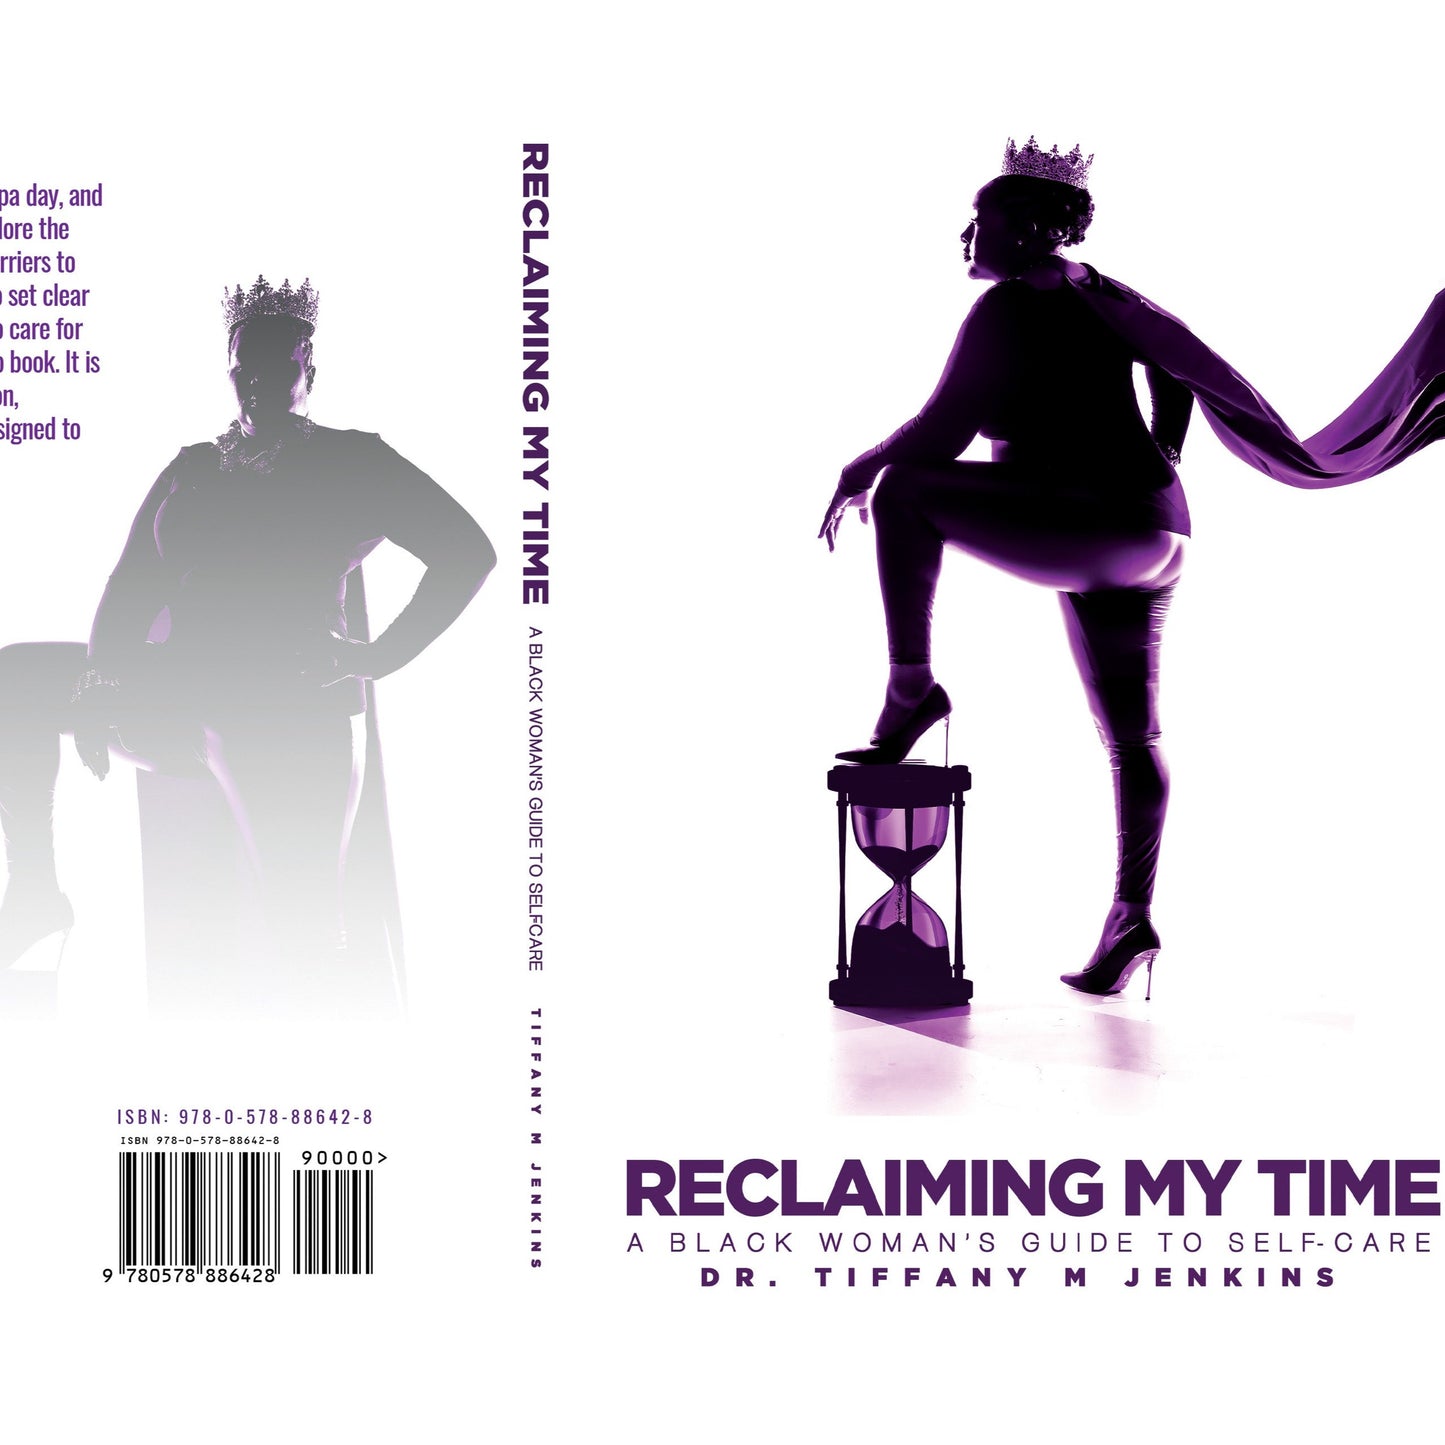 Reclaiming My Time: A Black Woman's Guide to Self-Care